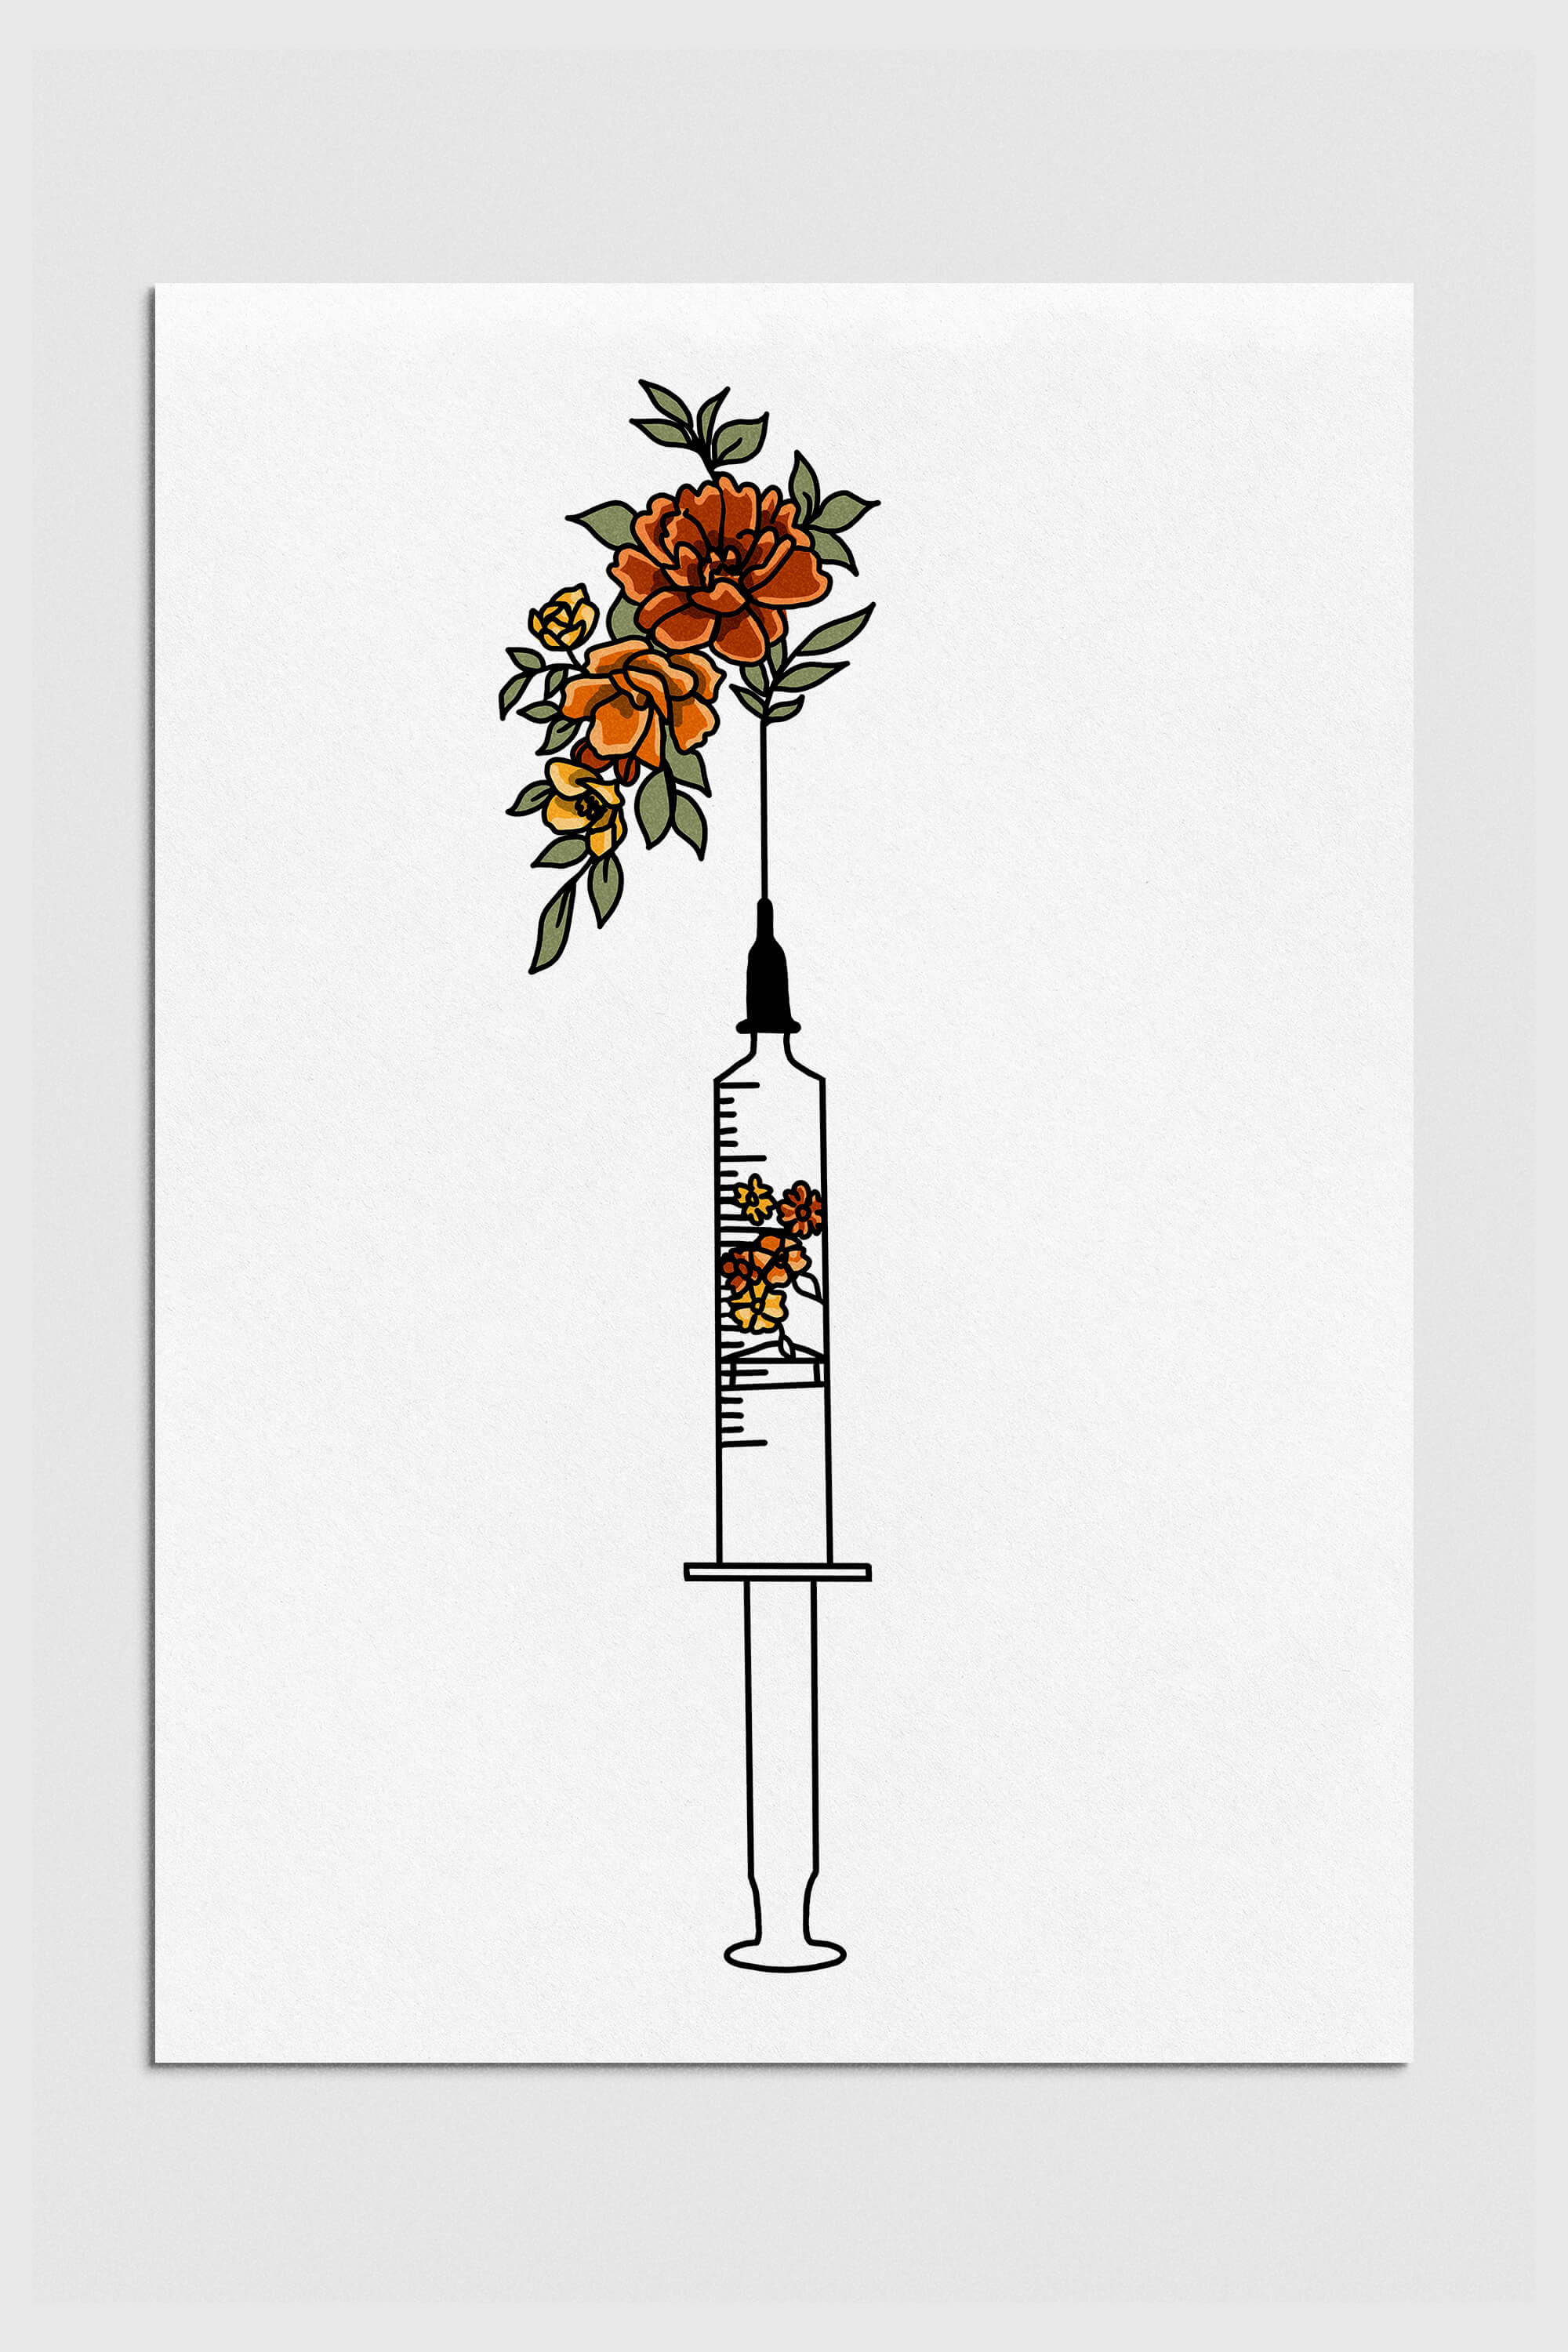 Floral Syringe Art Print offering a colorful accent to nursing office wall decor, blending medical and natural themes.